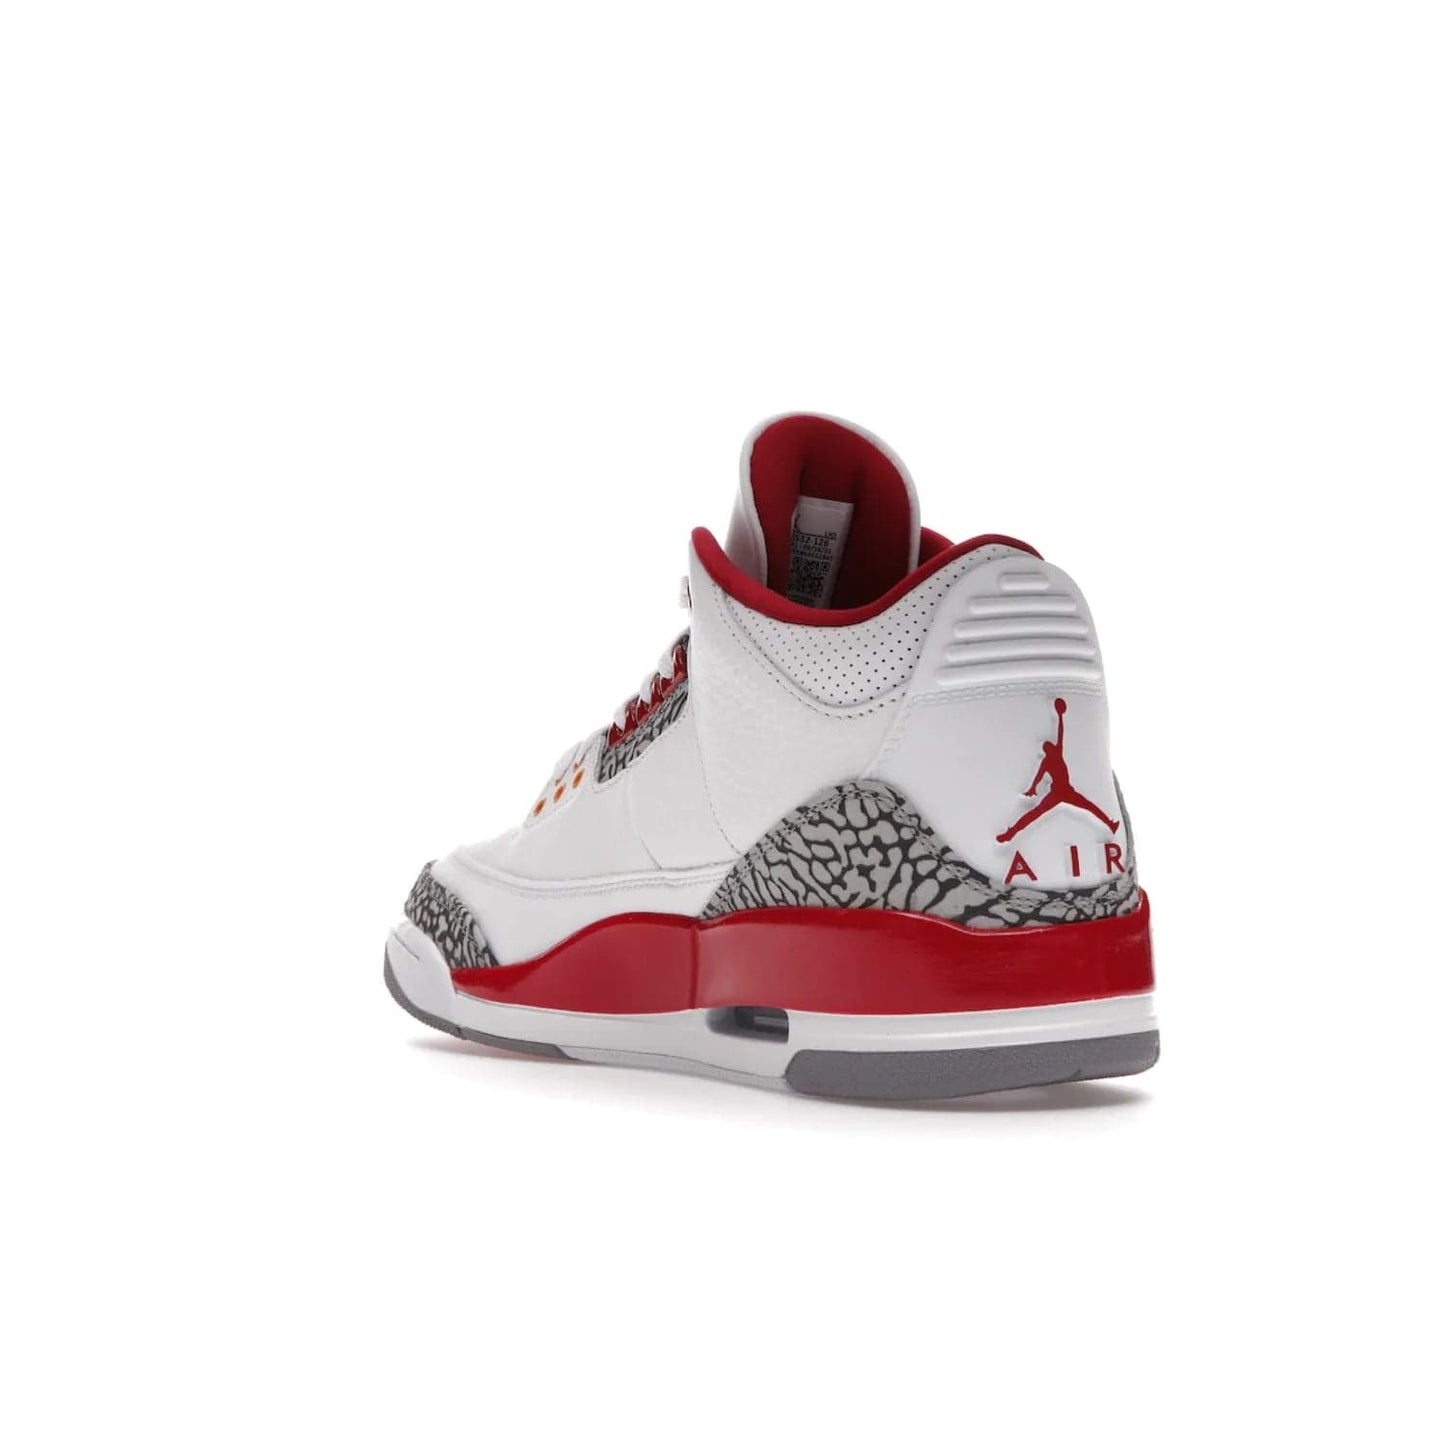 Jordan 3 Retro Cardinal Red - Image 25 - Only at www.BallersClubKickz.com - Air Jordan 3 Retro Cardinal Red combines classic style and modern appeal - white tumbled leather, signature Elephant Print overlays, cardinal red midsoles, Jumpman logo embroidery. Available Feb 2022.